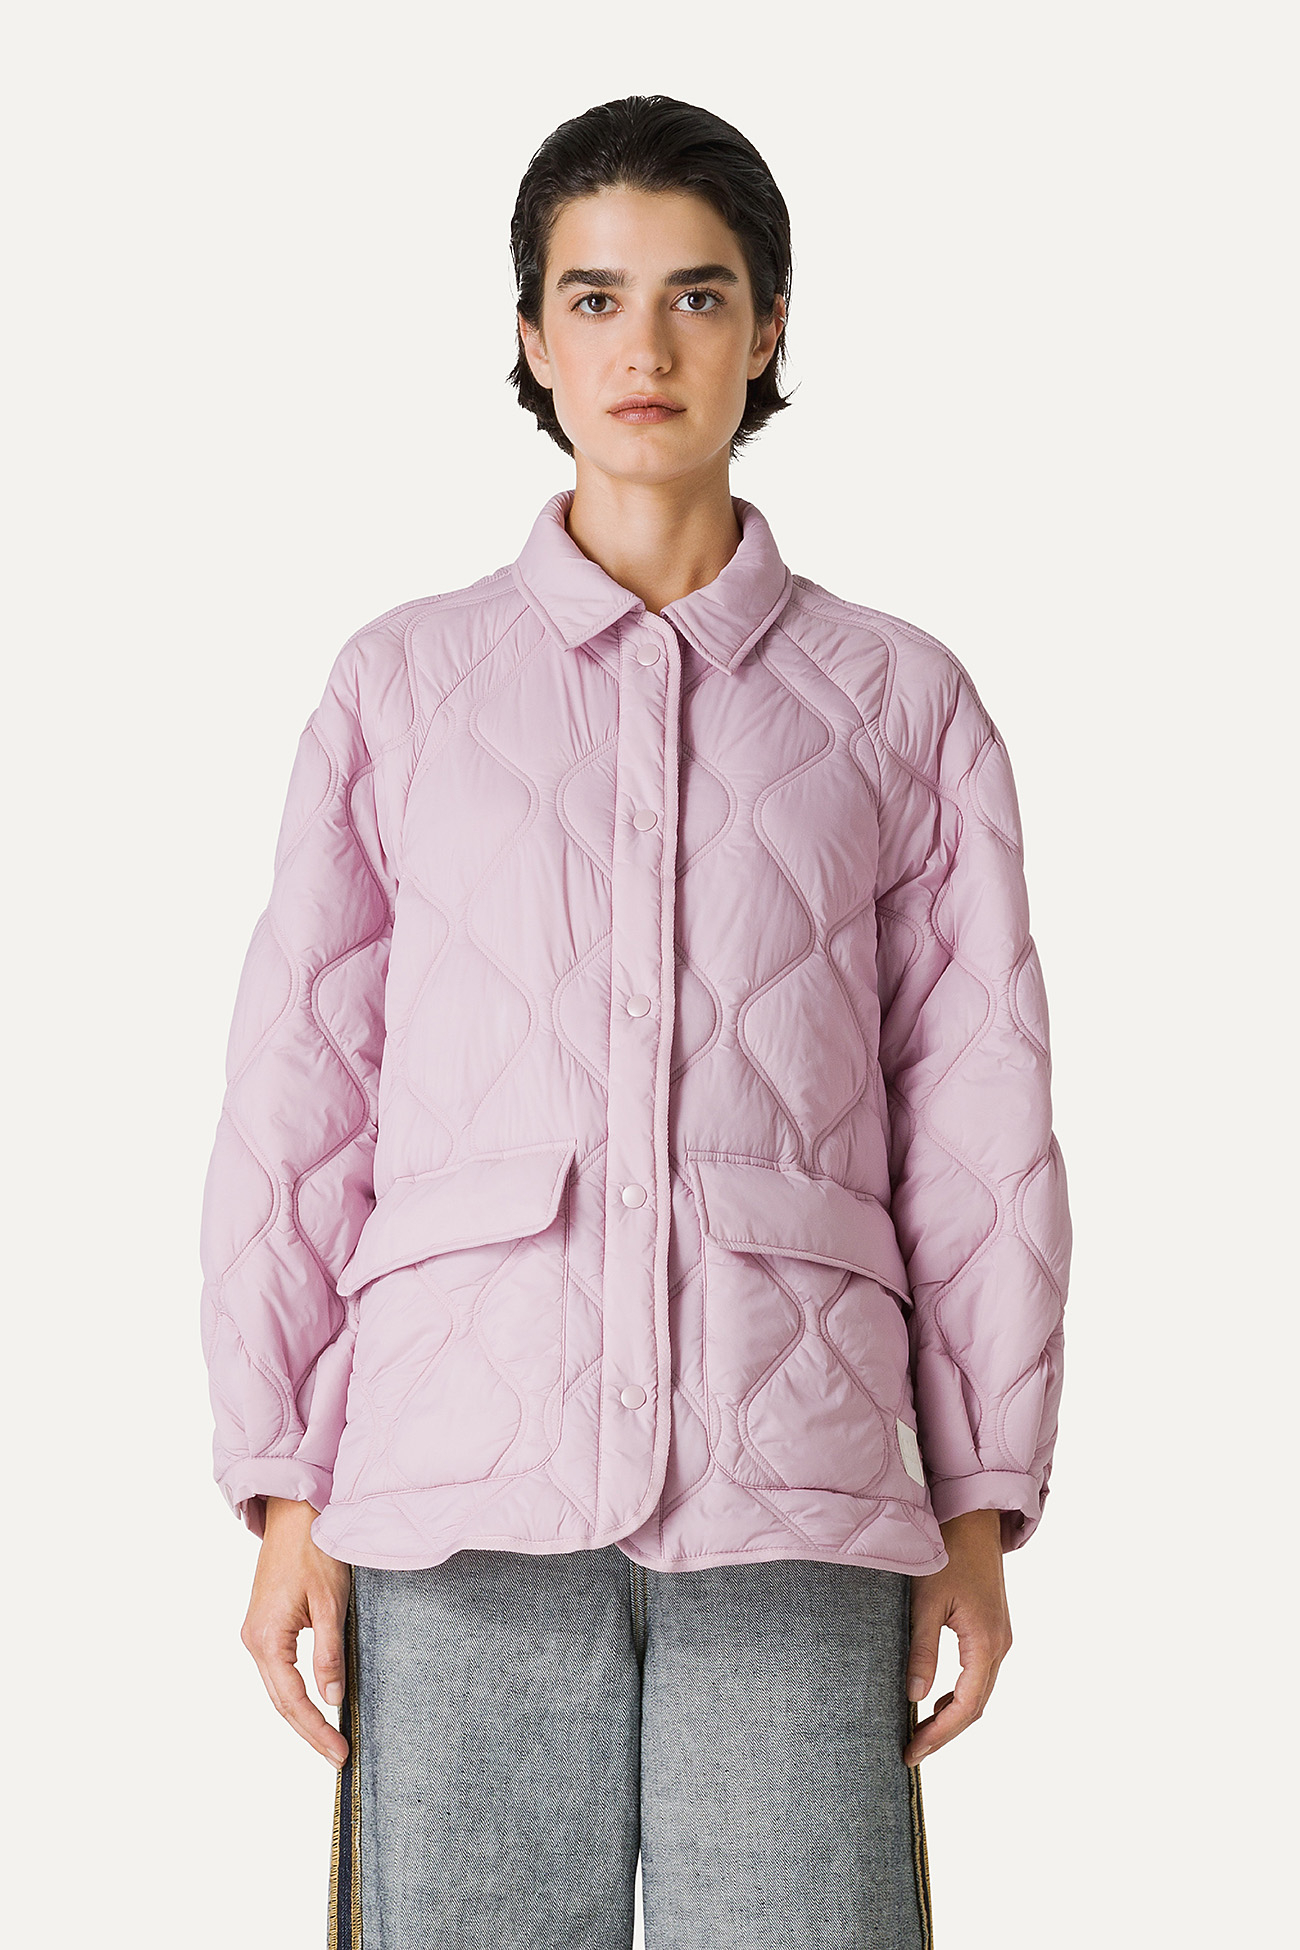 OVERSIZE JACKET IN QUILTED LIGHT NYLON 9222 - PINK - OOF WEAR